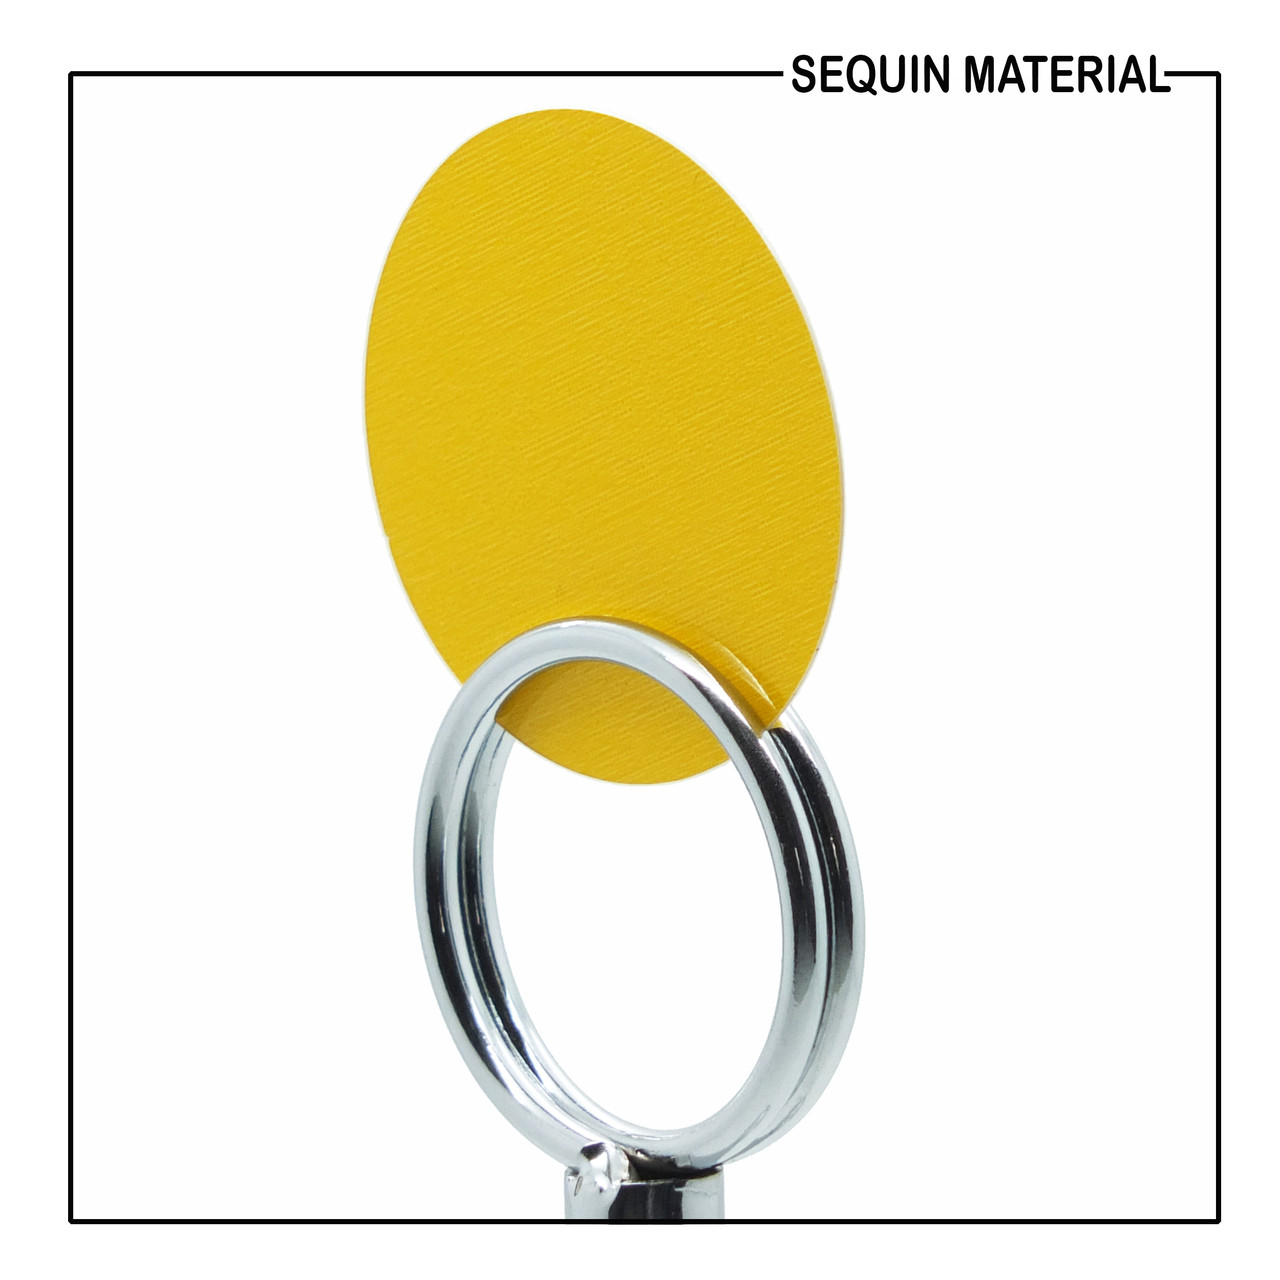 SequinsUSA Yellow Opaque Glossy High Shine Sequin Material Film RL774